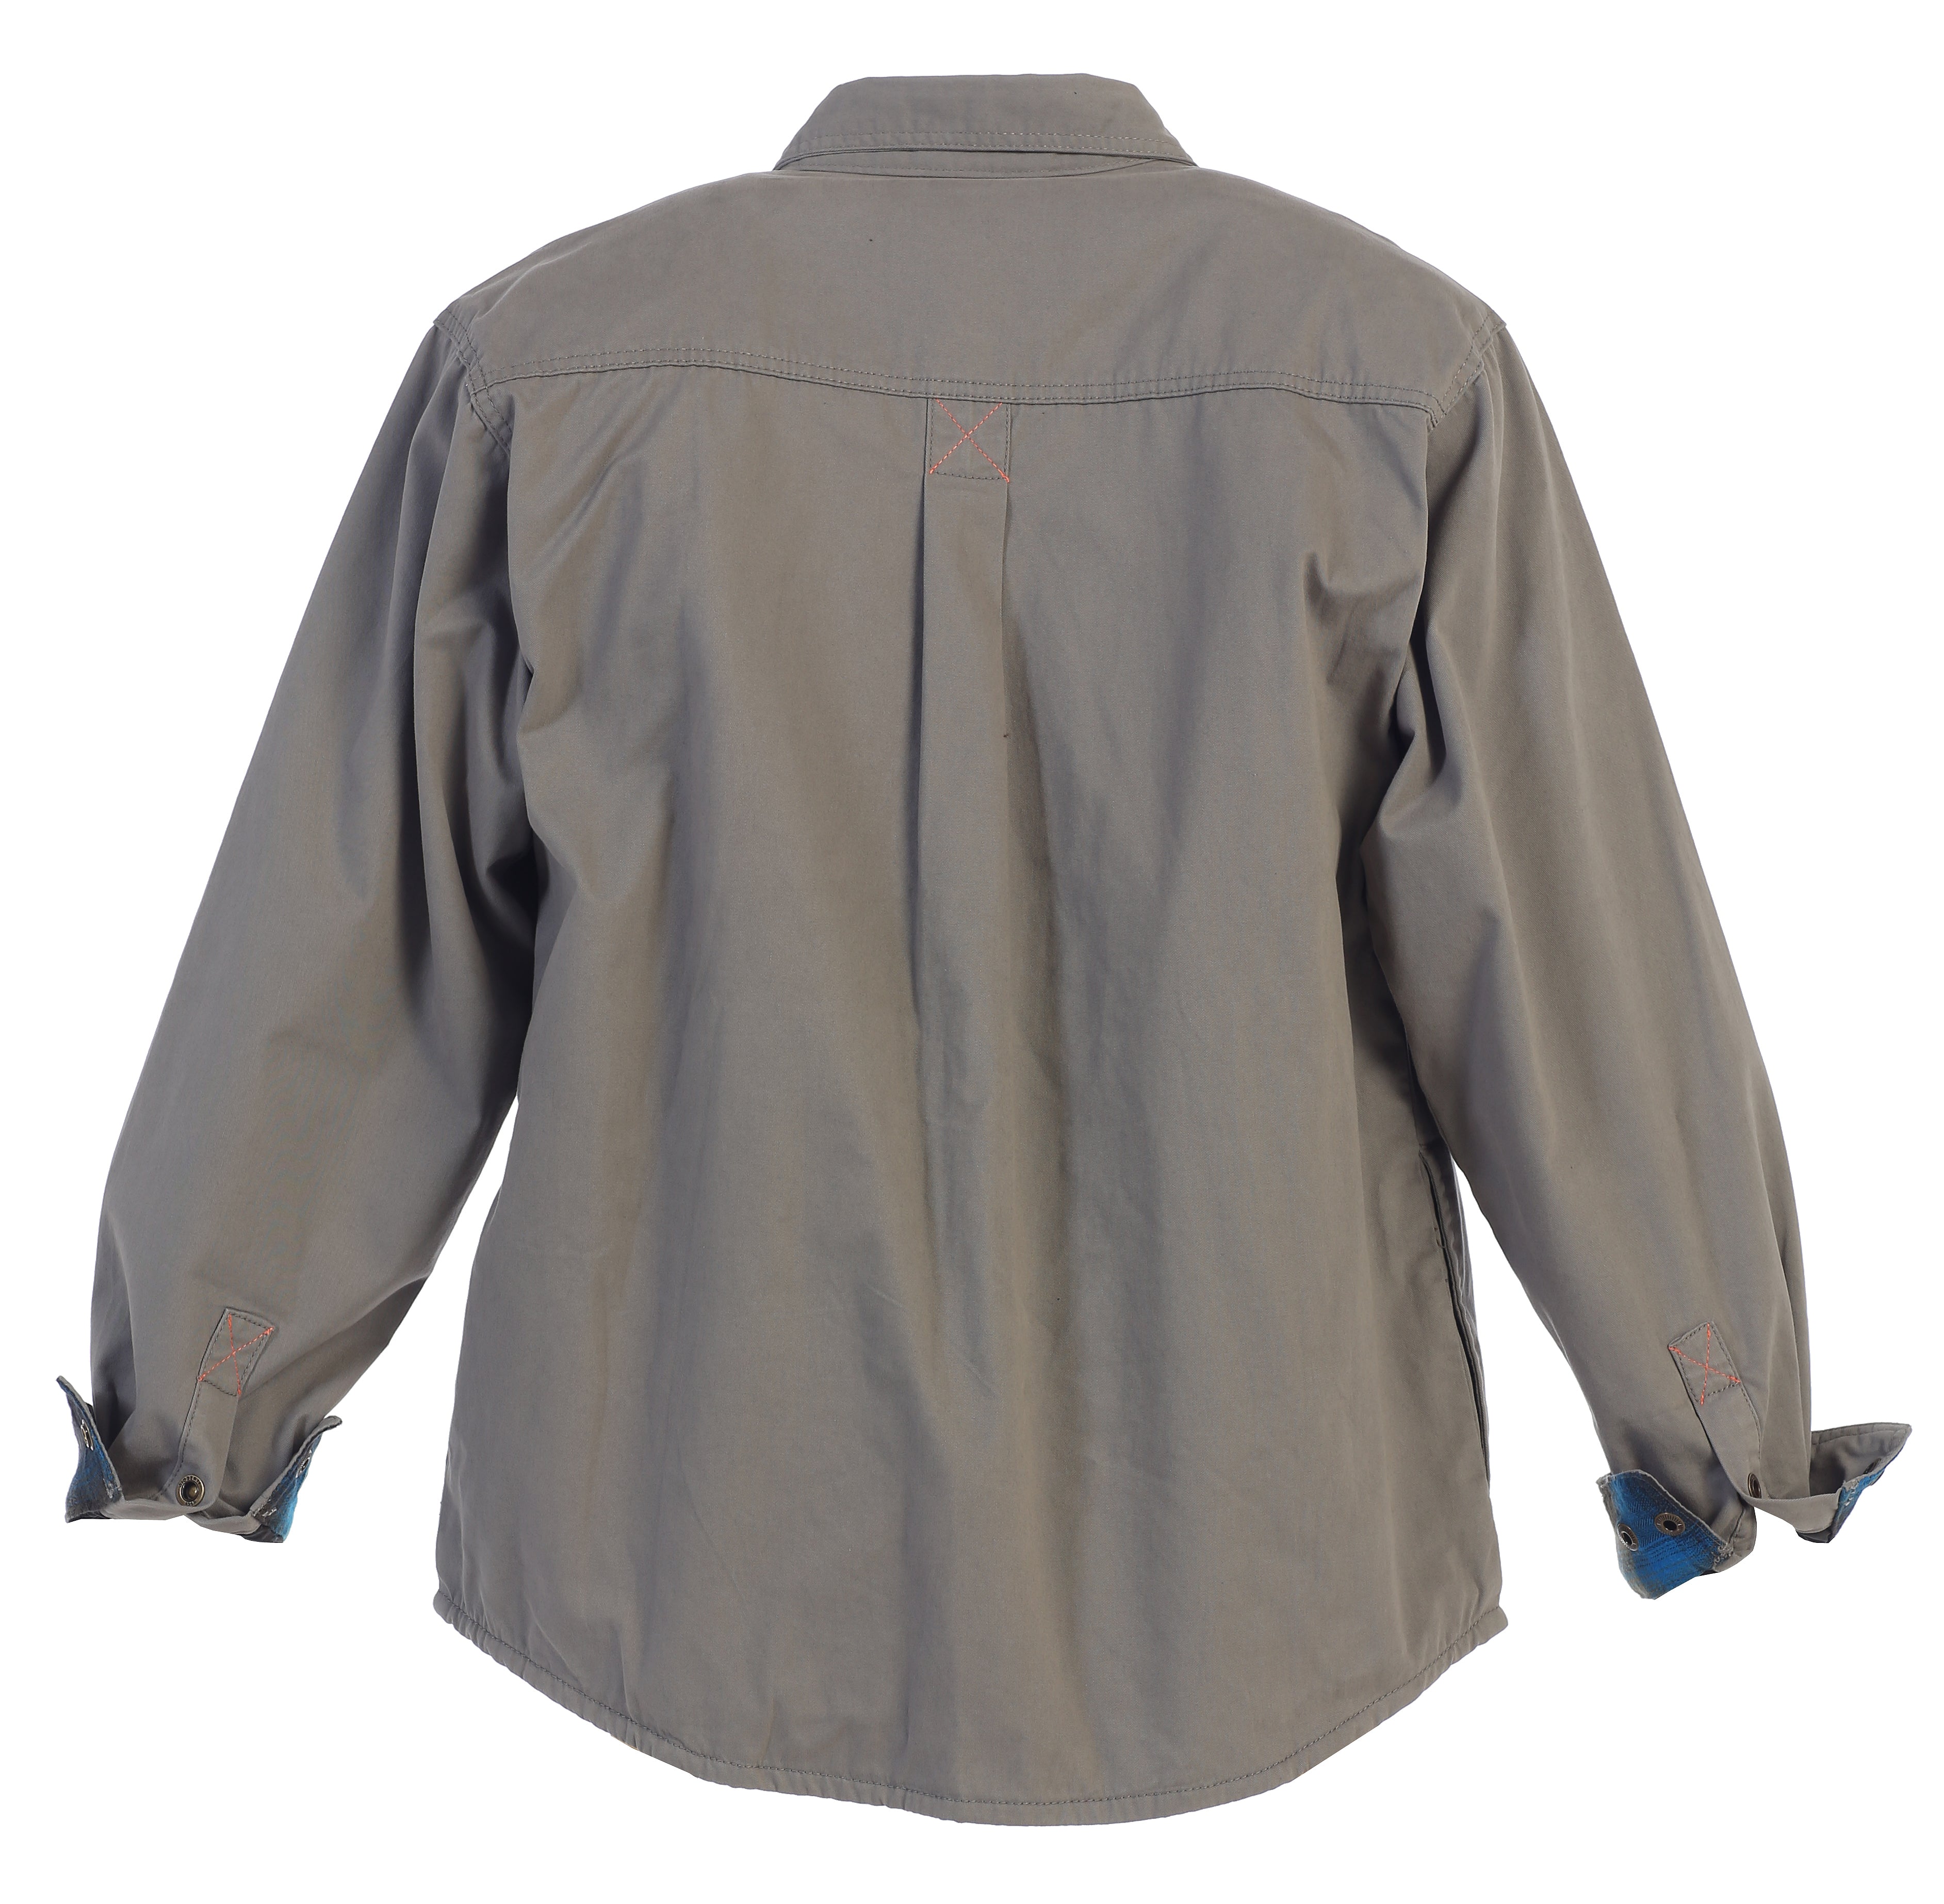 title:Gioberti Men's Gray Cotton Brushed and Soft Twill Shirt Jacket with Flannel Lining;color:Gray